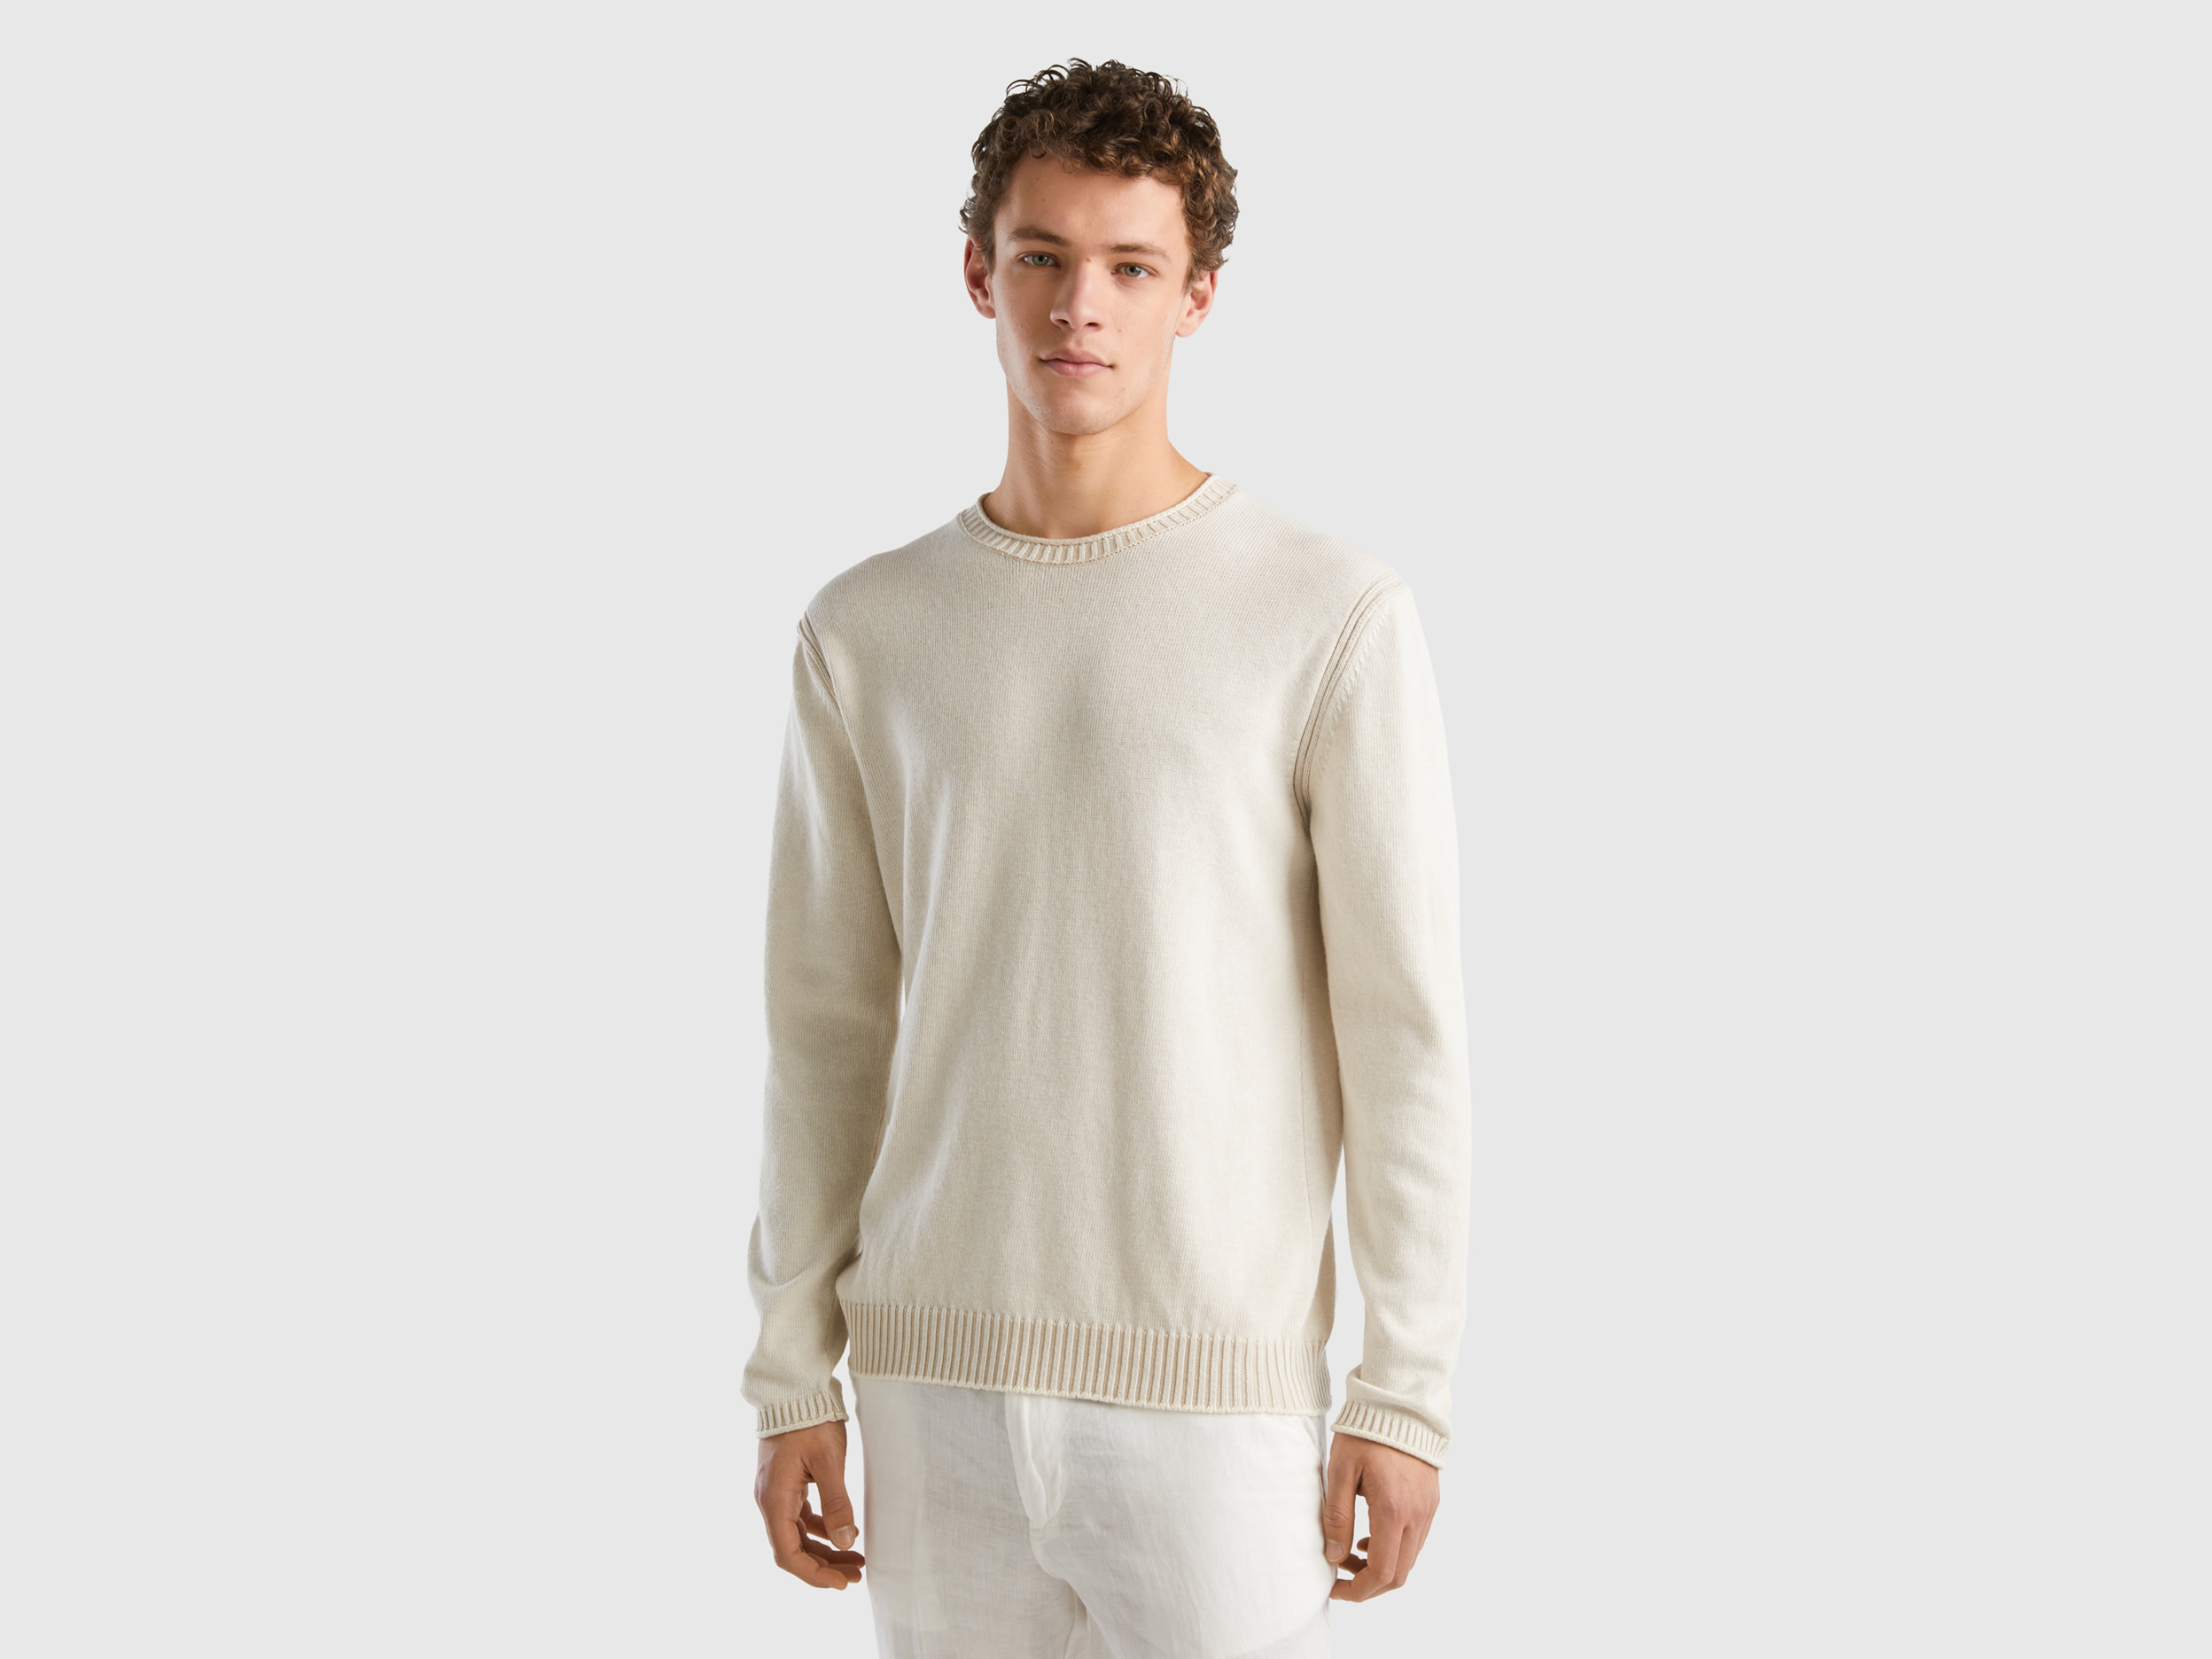 Image of Benetton, Sweater In Recycled Cotton Blend, size L, Creamy White, Men